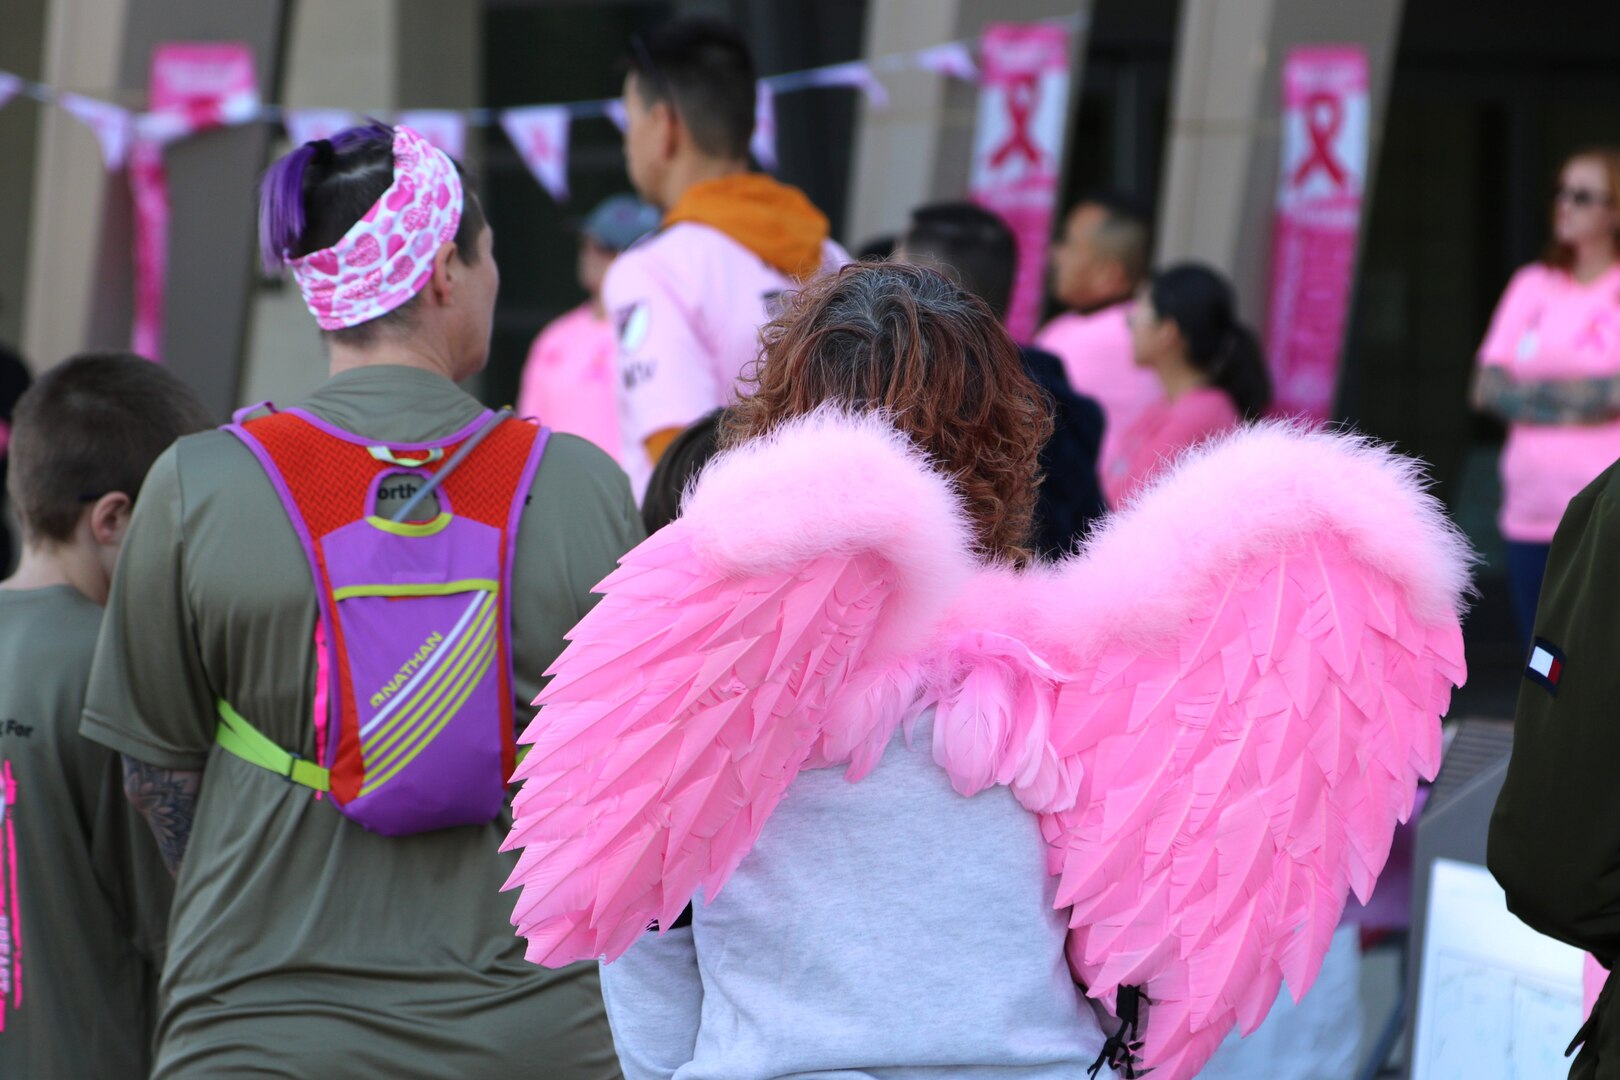 Back view of woman wearing pink angel wings standing next to another woman with headband.